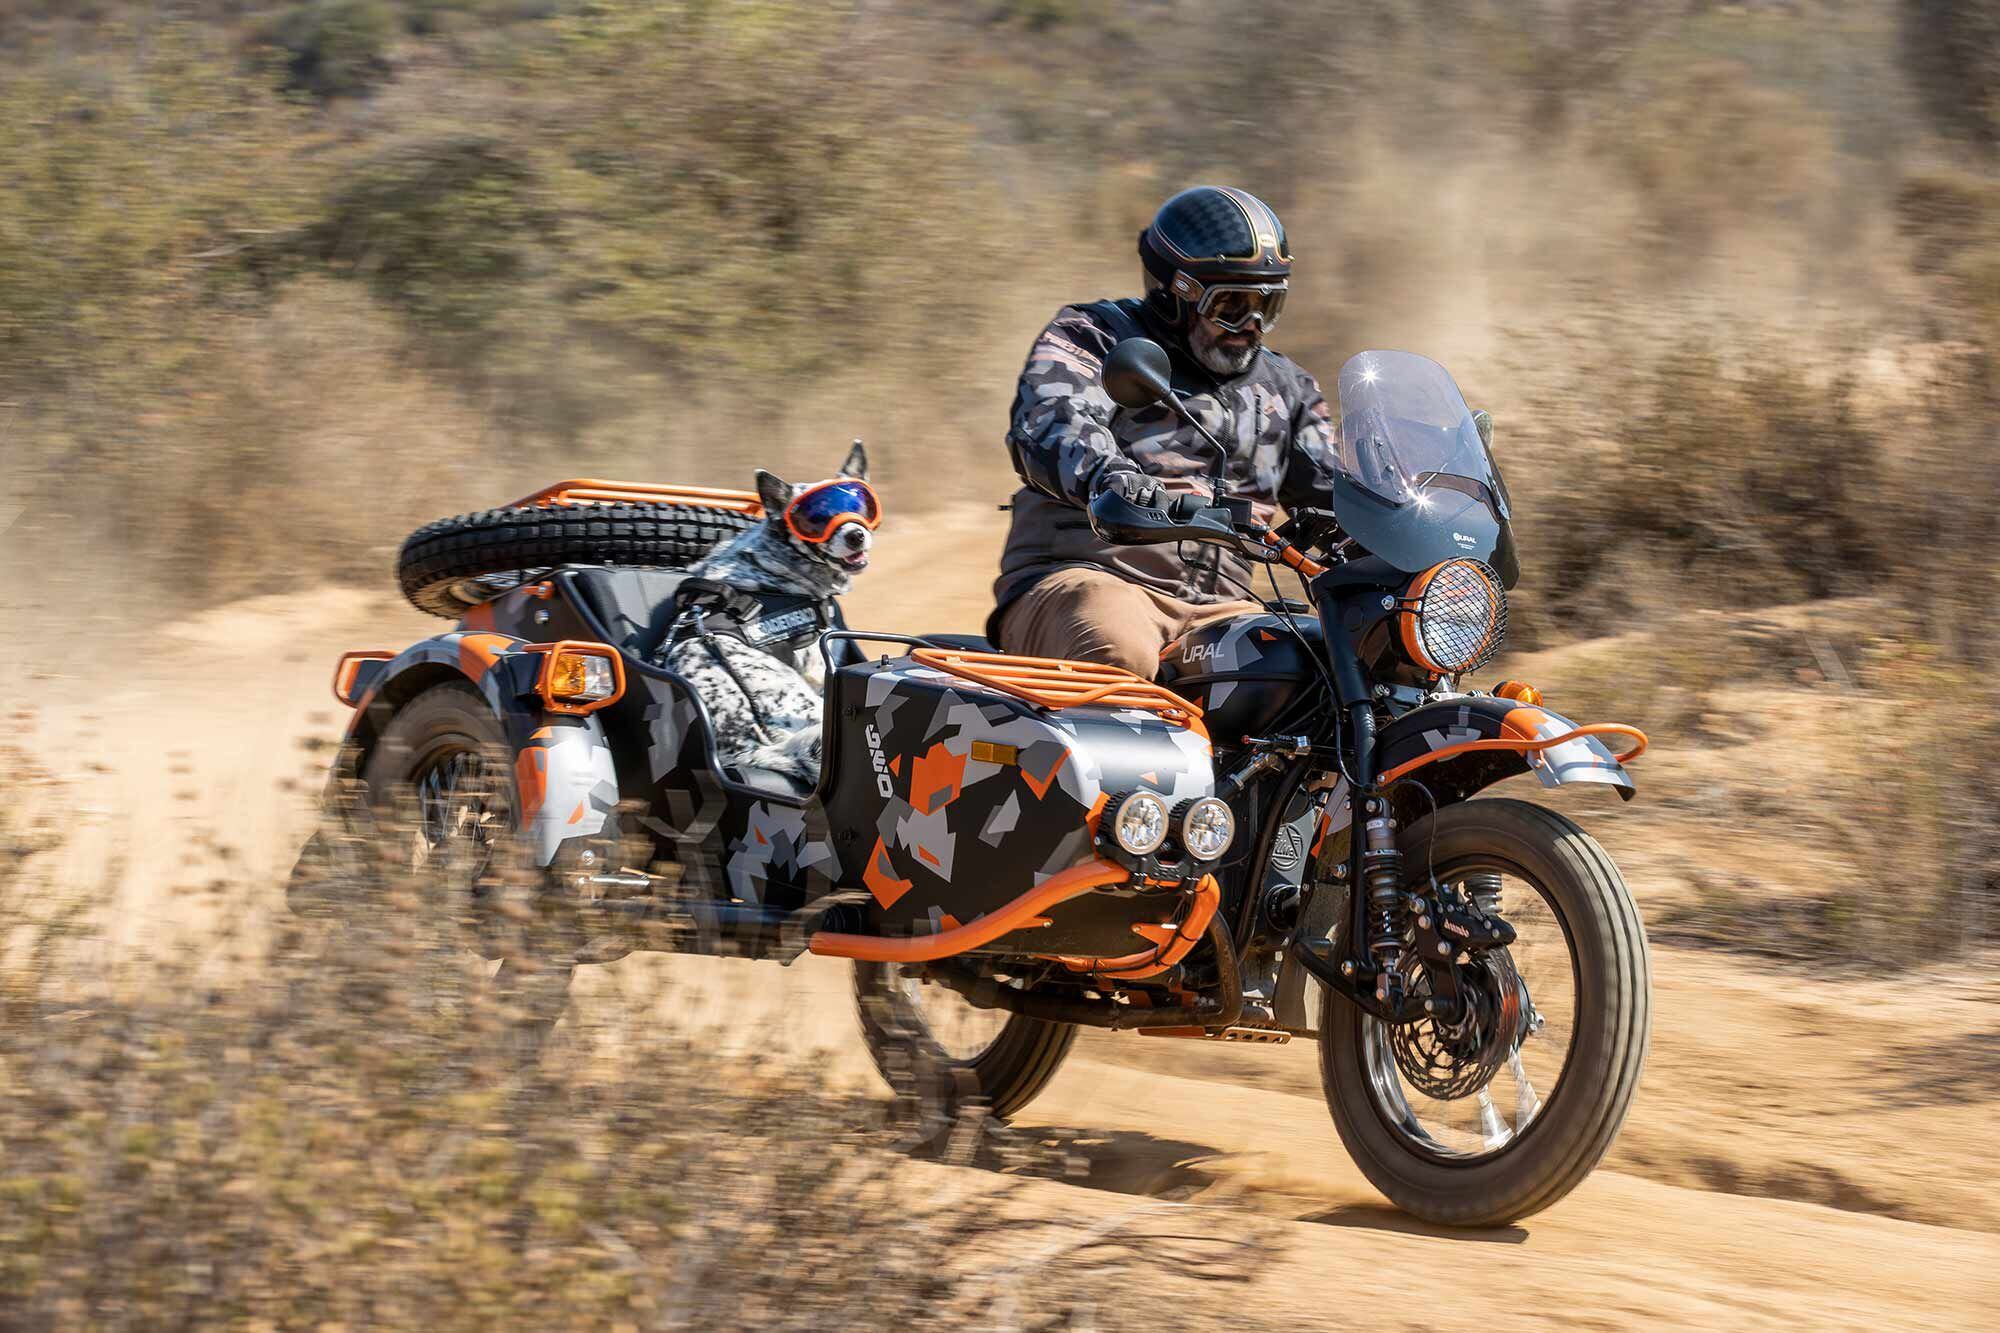 Work or play, the Ural Gear Up Geo is a good time. Gracie prefers play.